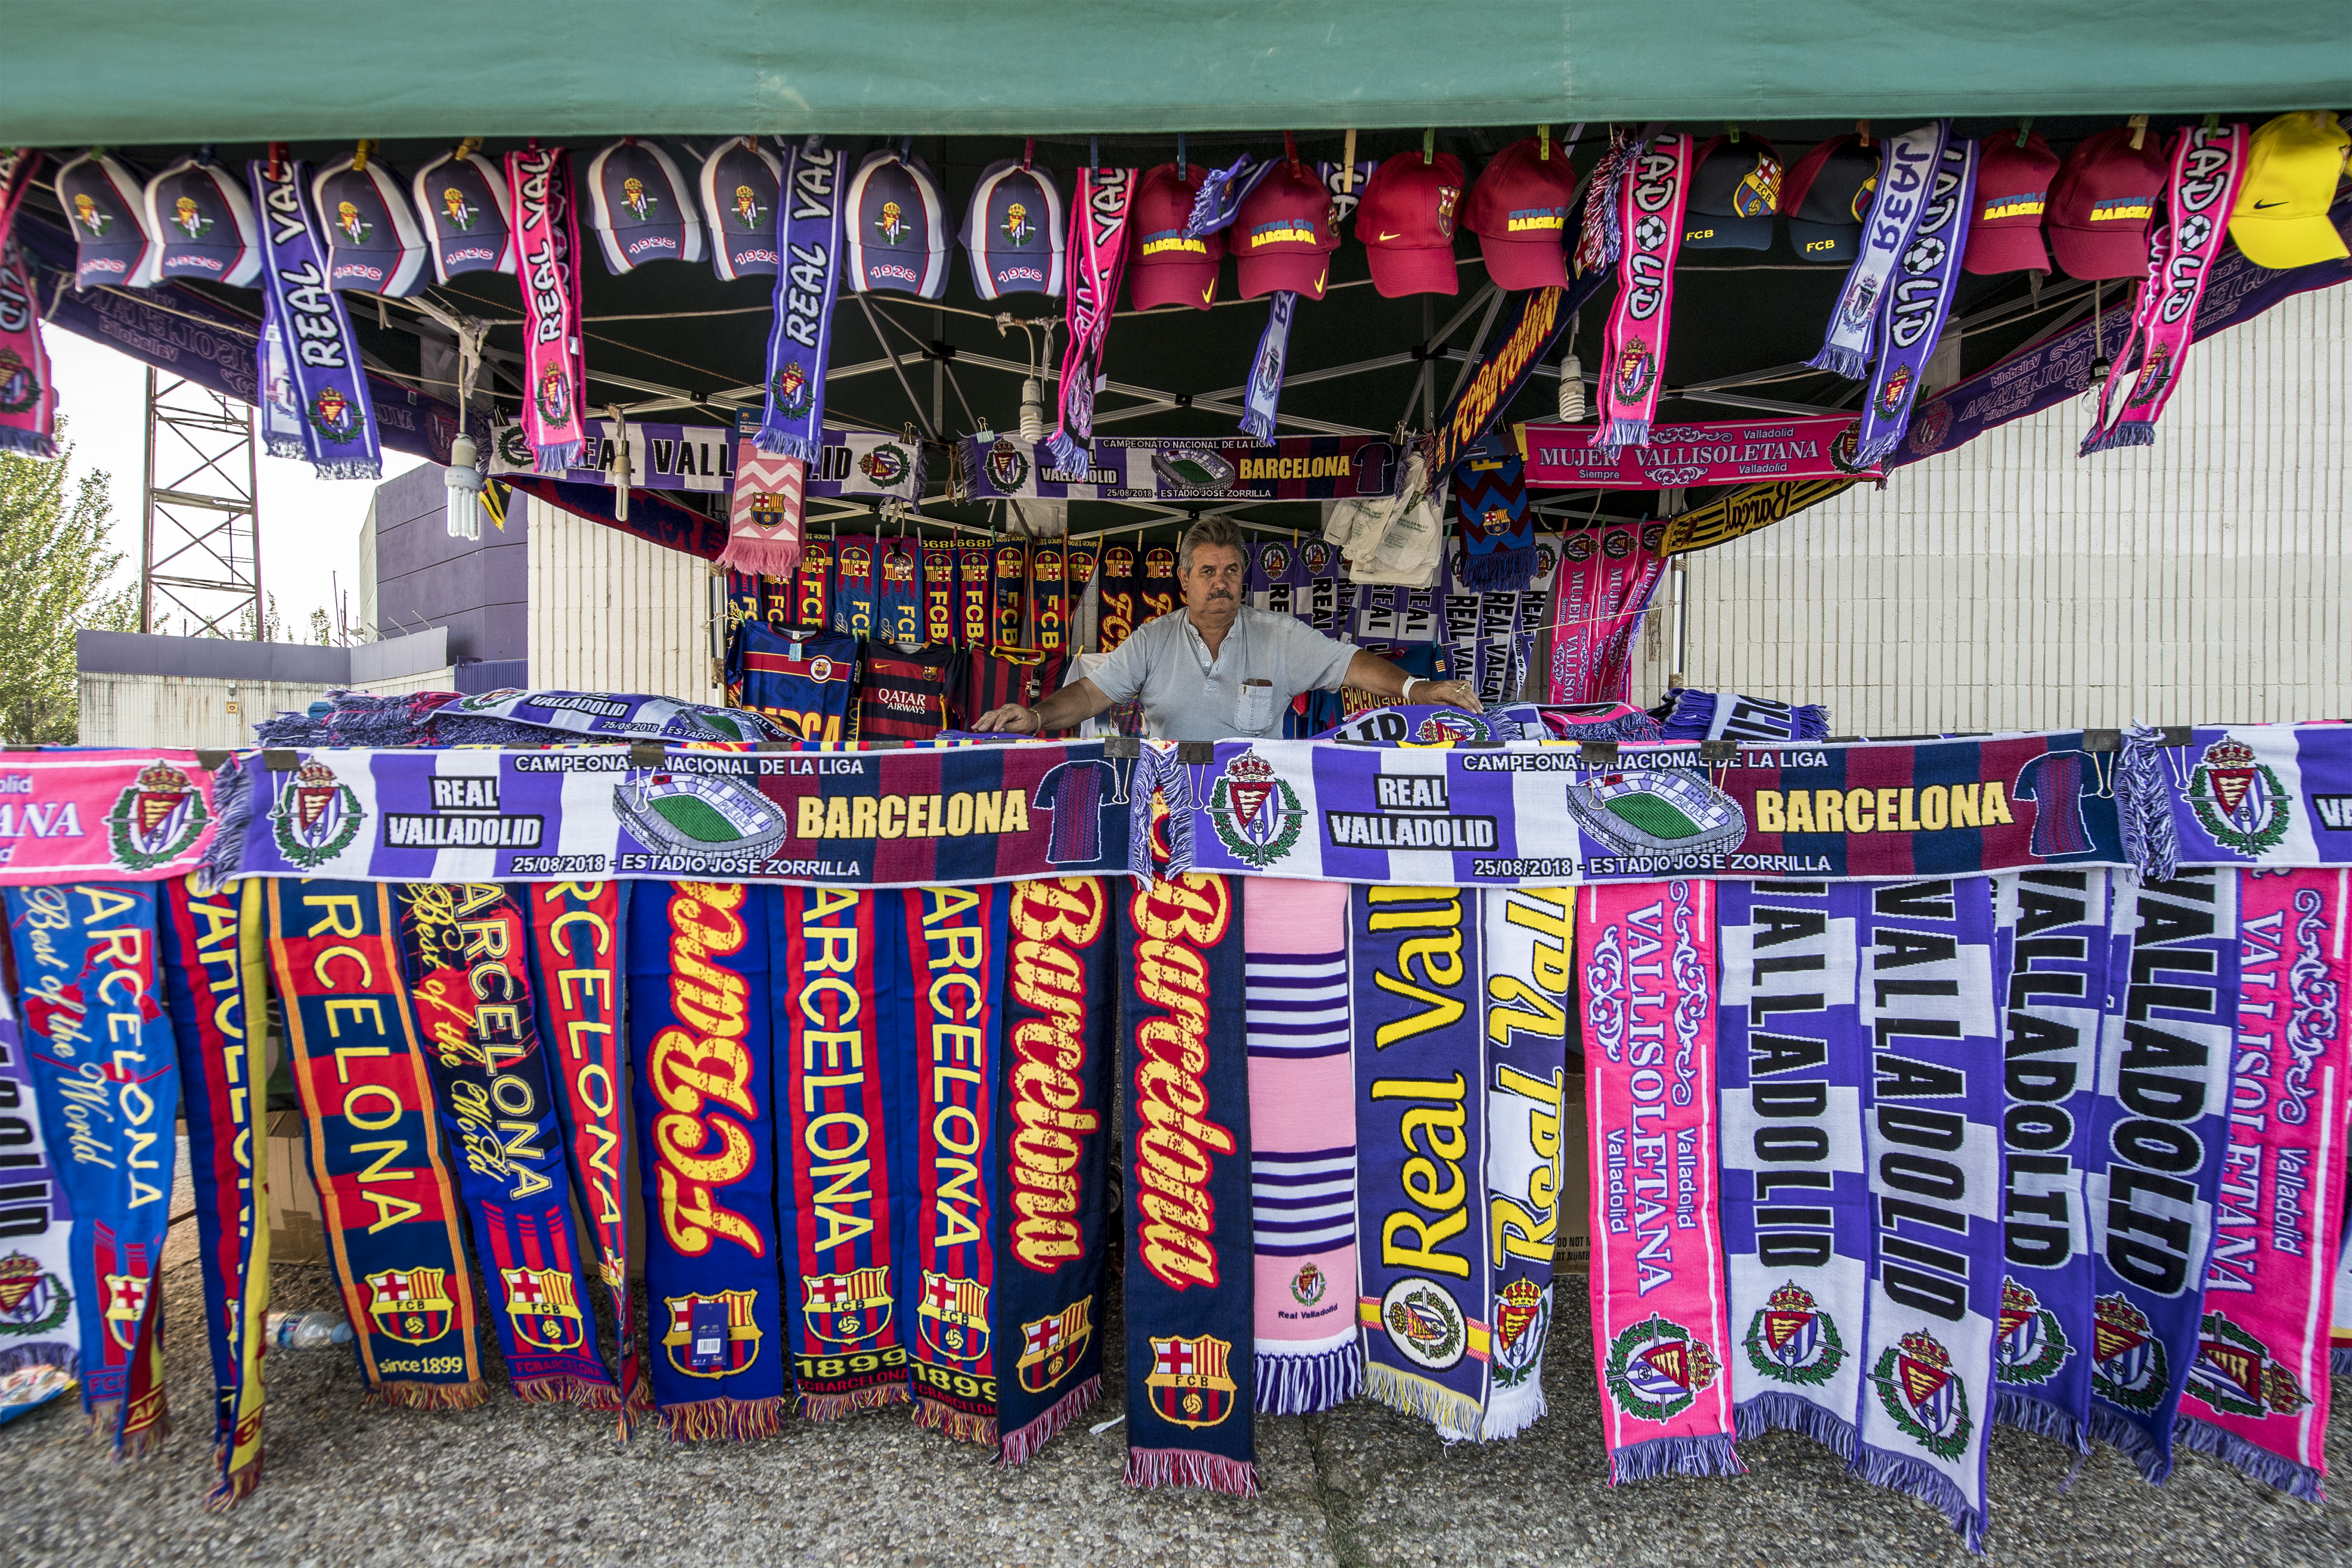 VALLADOLID, SPAIN - AUGUST 25: A scarf salesman outside the stadium prior the La Liga match between Real Valladolid CF and FC Barcelona at Jose Zorrilla on August 25, 2018 in Valladolid, Spain. (Photo by Octavio Passos/Getty Images)